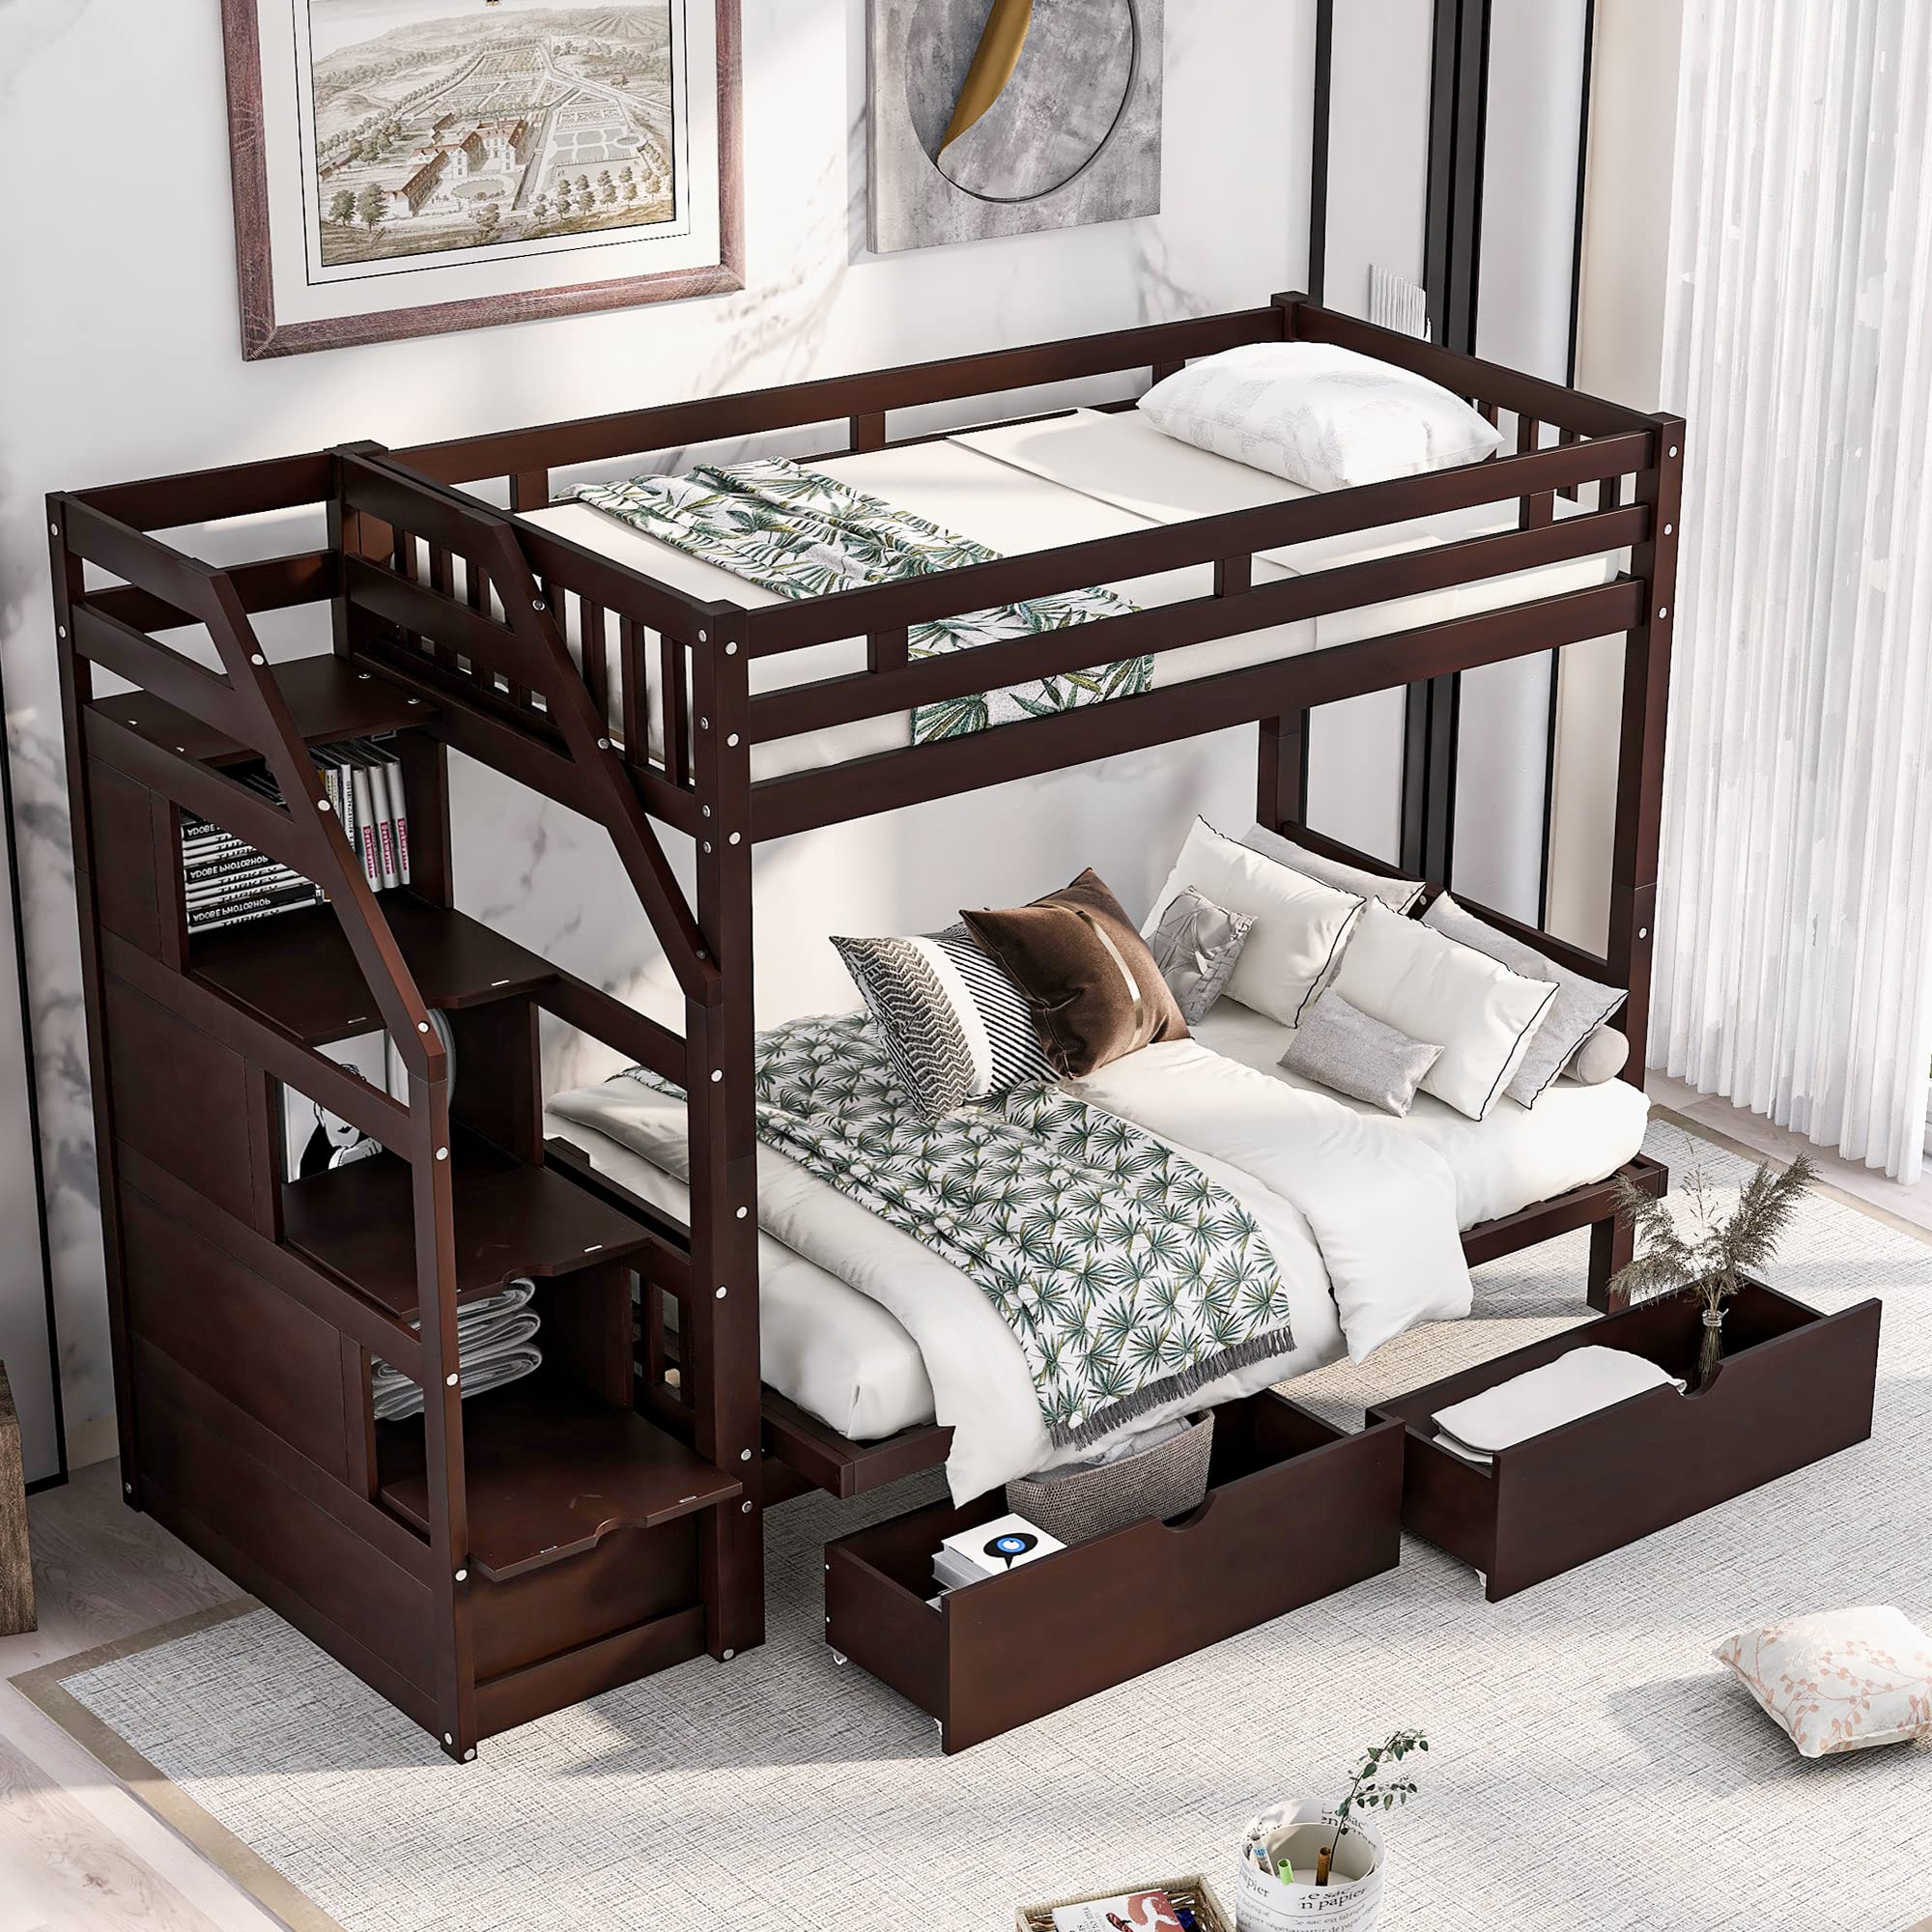 Harper & Bright Designs Twin Over Full Futon Bunk Beds with Stairs and Two Storage Drawers Down Bed can be converted into Daybed